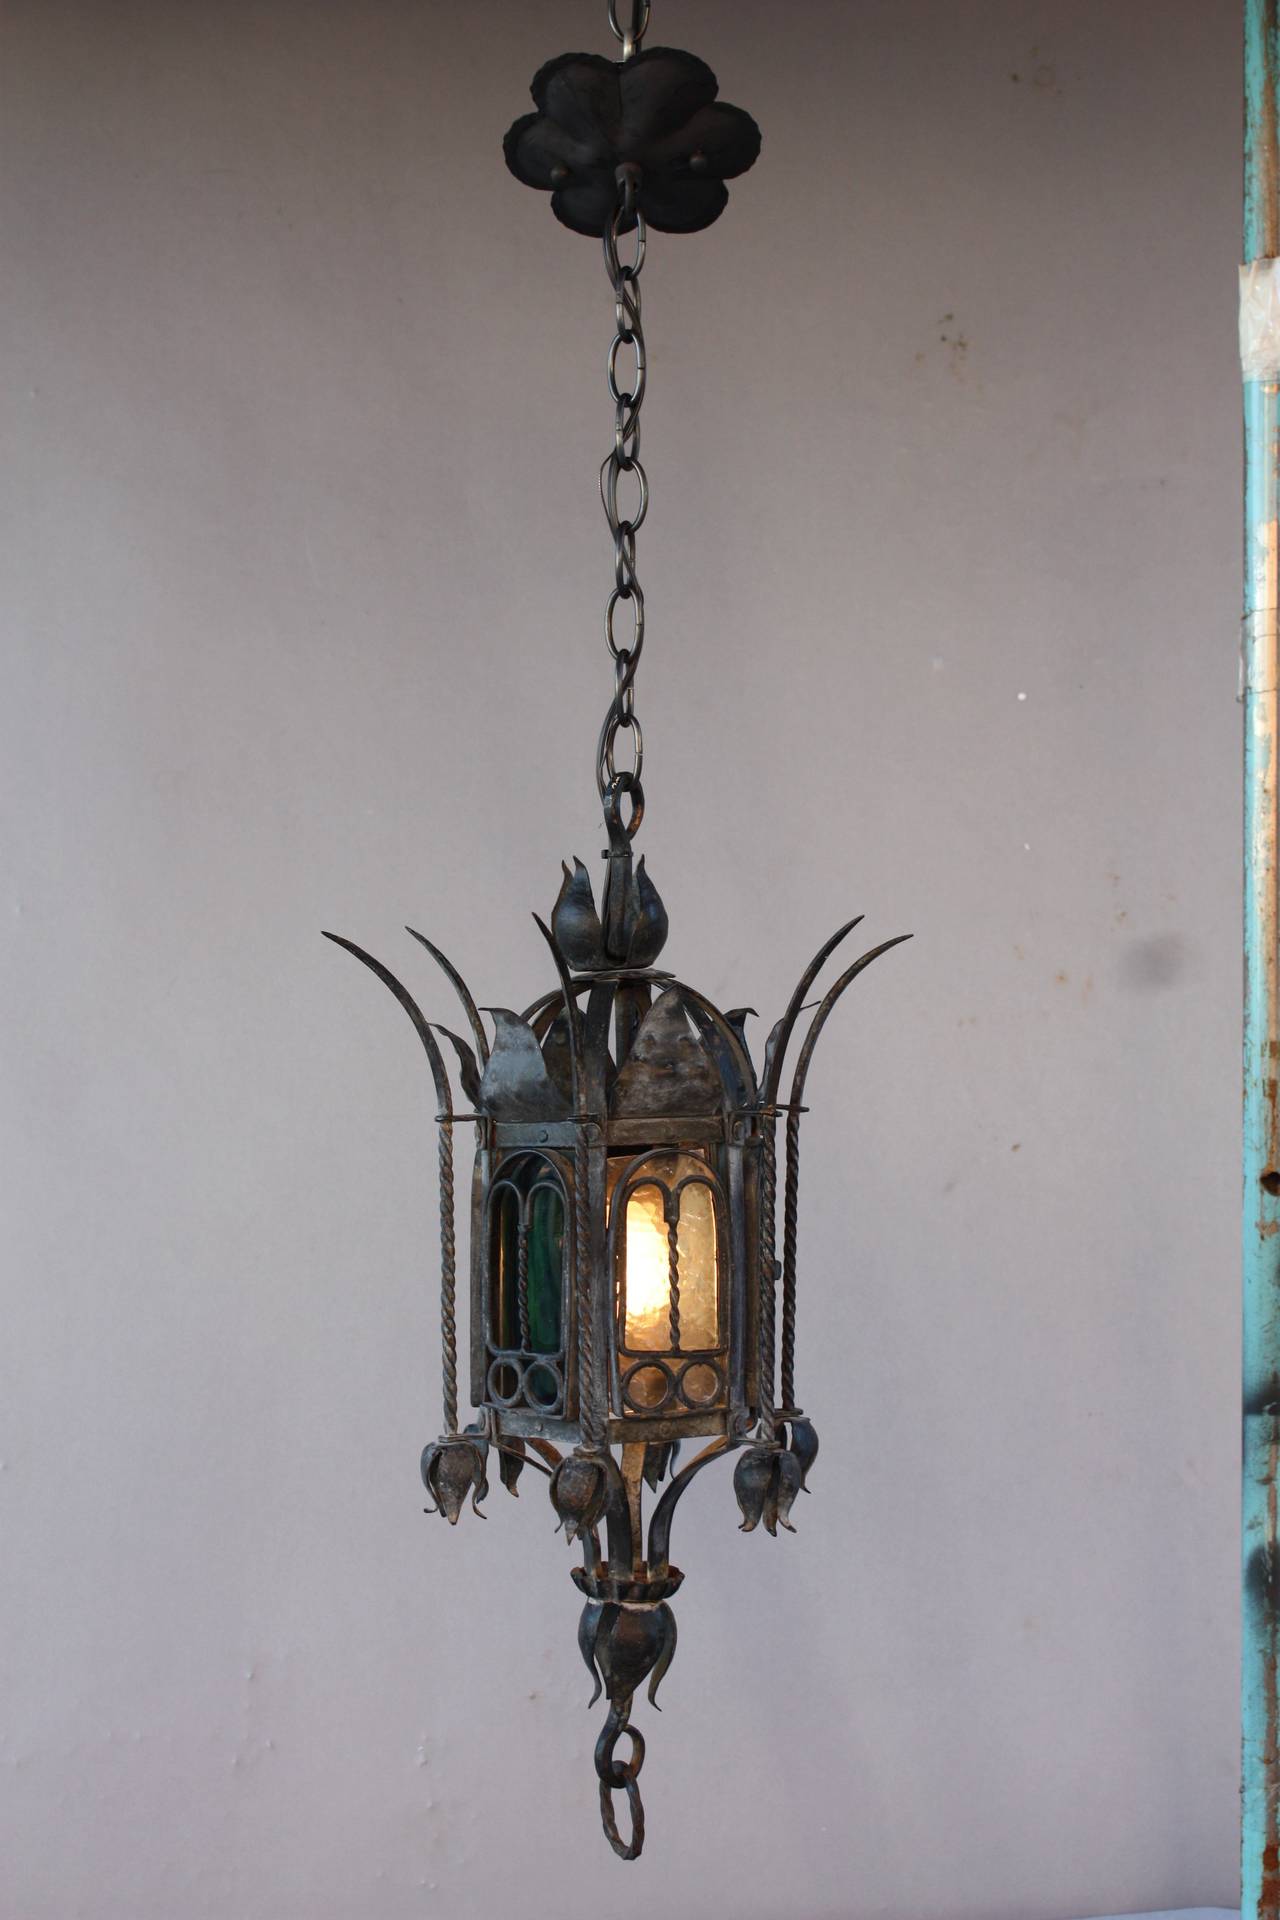 Classic 1920's iron pendant with slag glass. Body of fixture is 21.75